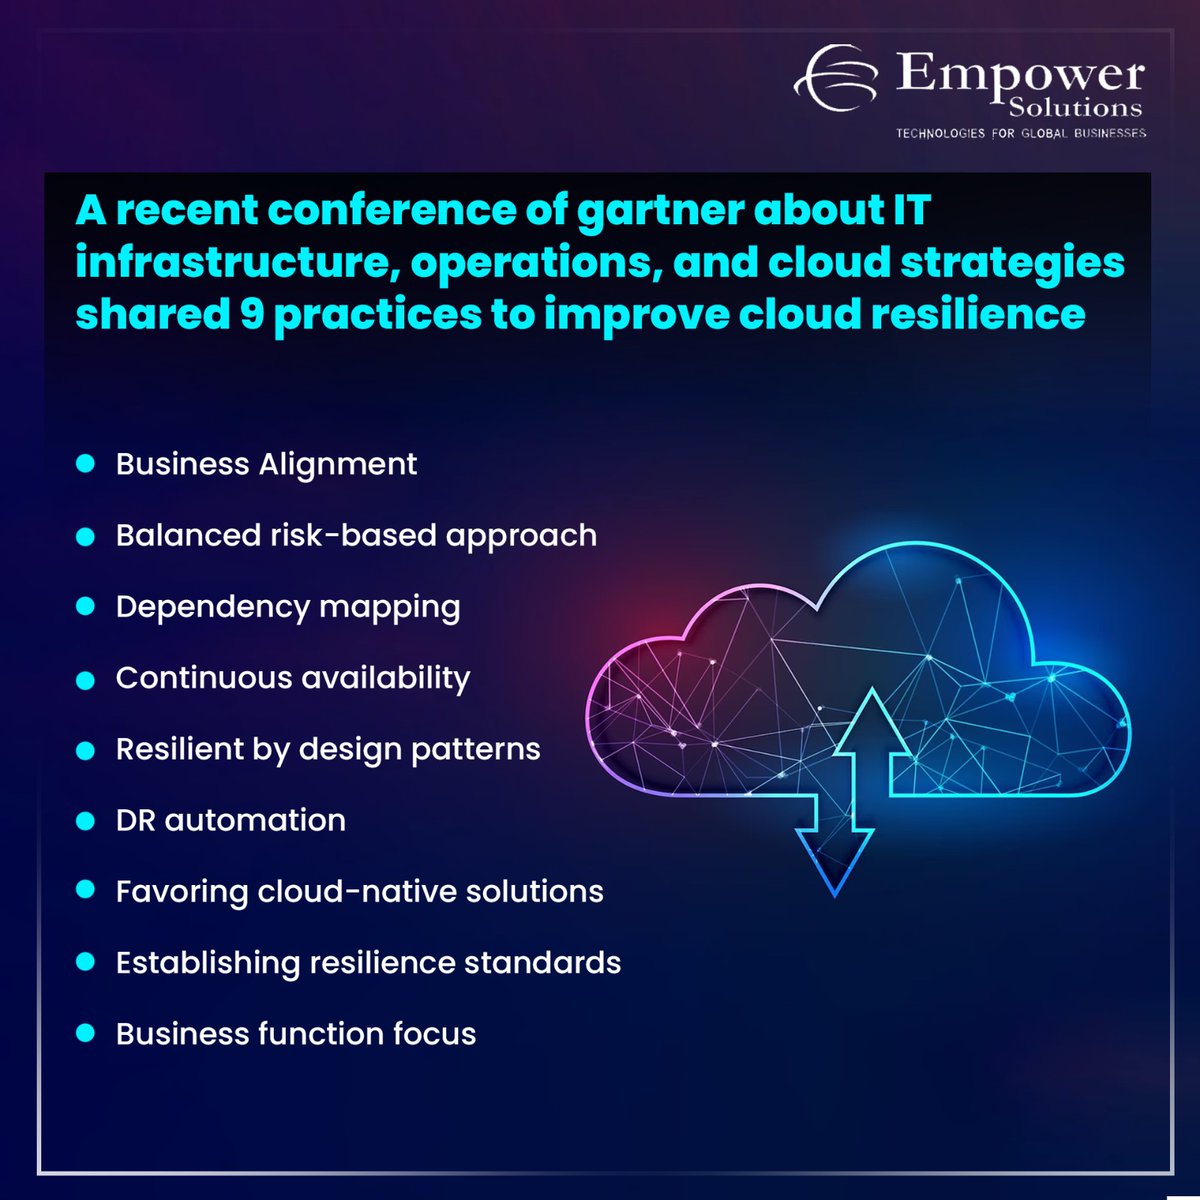 Gartner's 9 Key Practices Revealed at IT Infrastructure Conference 🚀 Explore strategies such as business alignment, balanced risk, and cloud-native solutions to fortify your IT infrastructure.
#TechNews #CloudResilience #GartnerInsights #EmpowerSolutions #ITPartner #TechIndustry